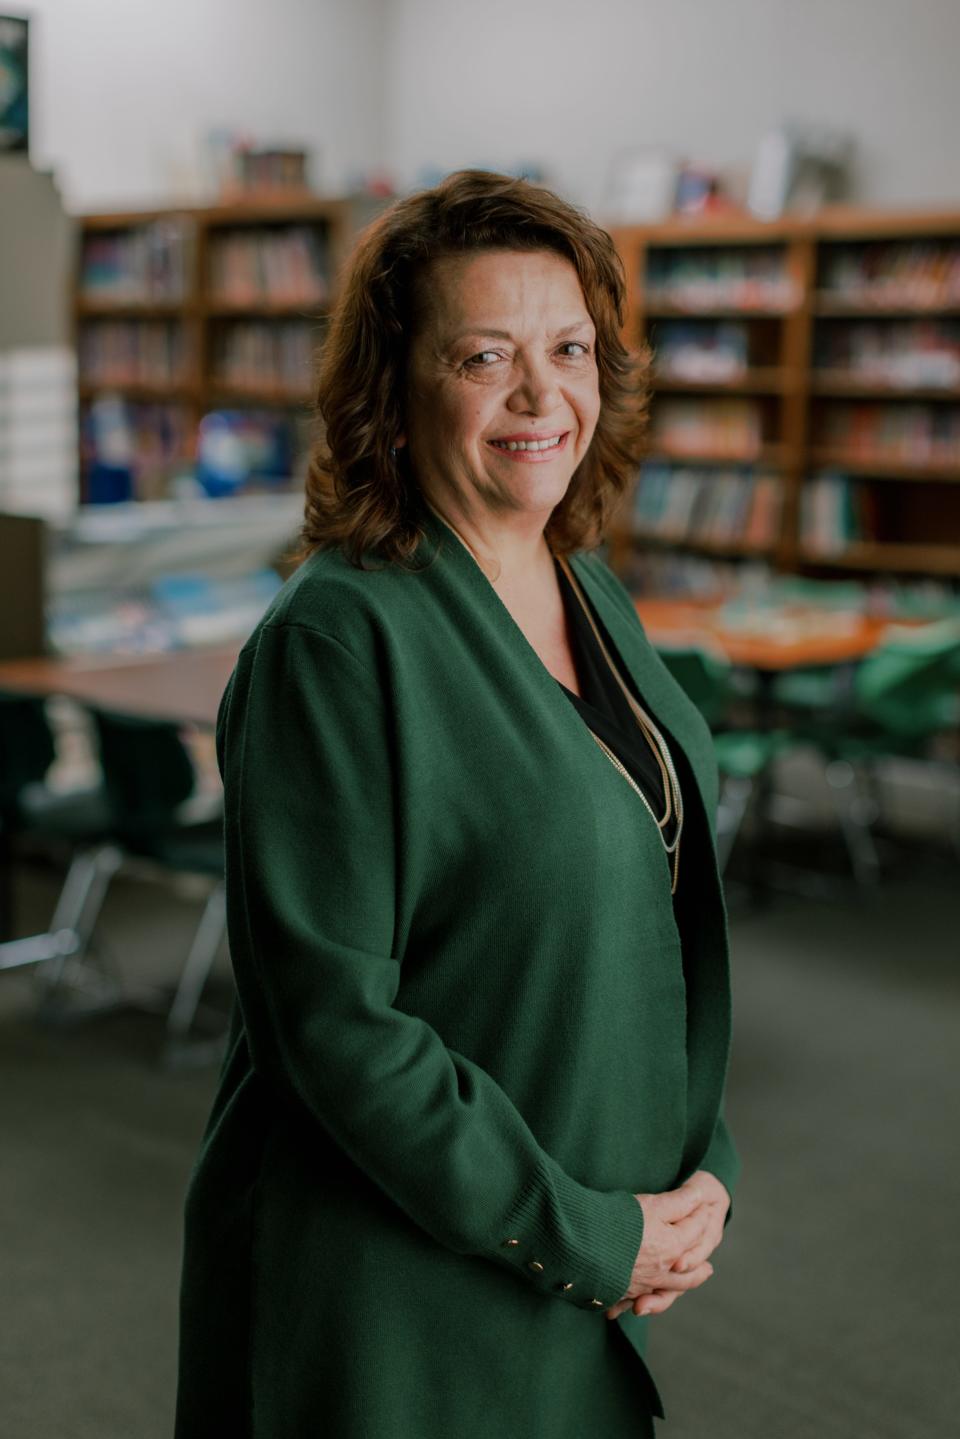 Miriam Soto is a library media clerk at Ripon Unified School District.